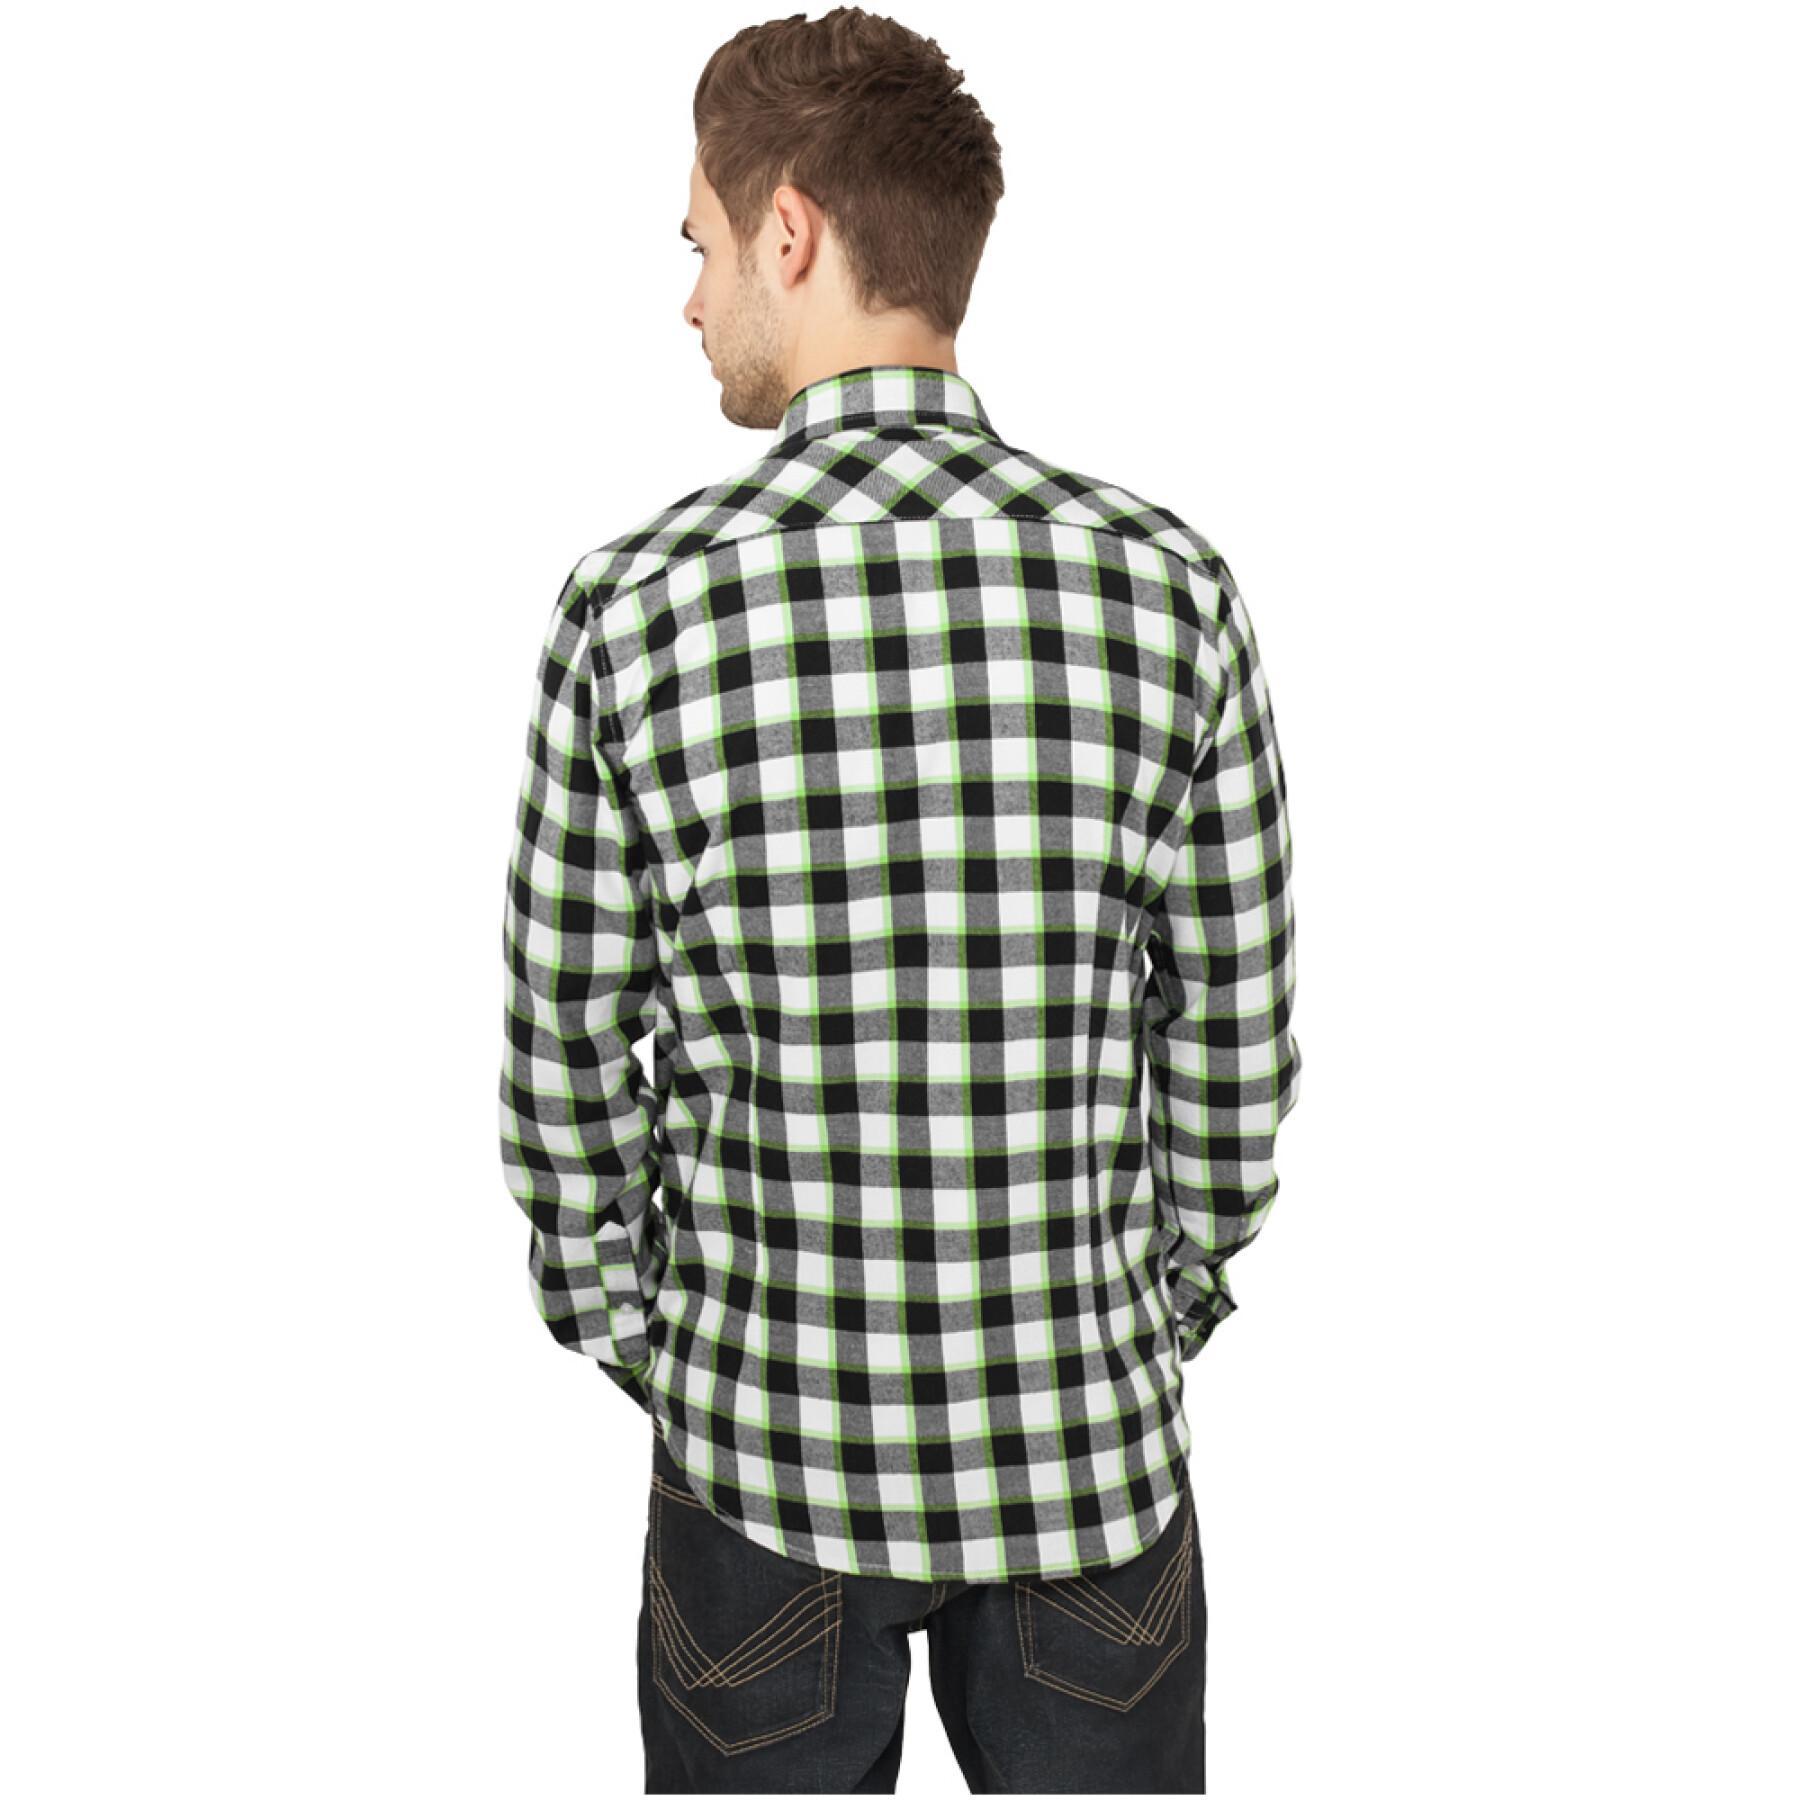 Chemise Urban Classics tricolor checked light flanell